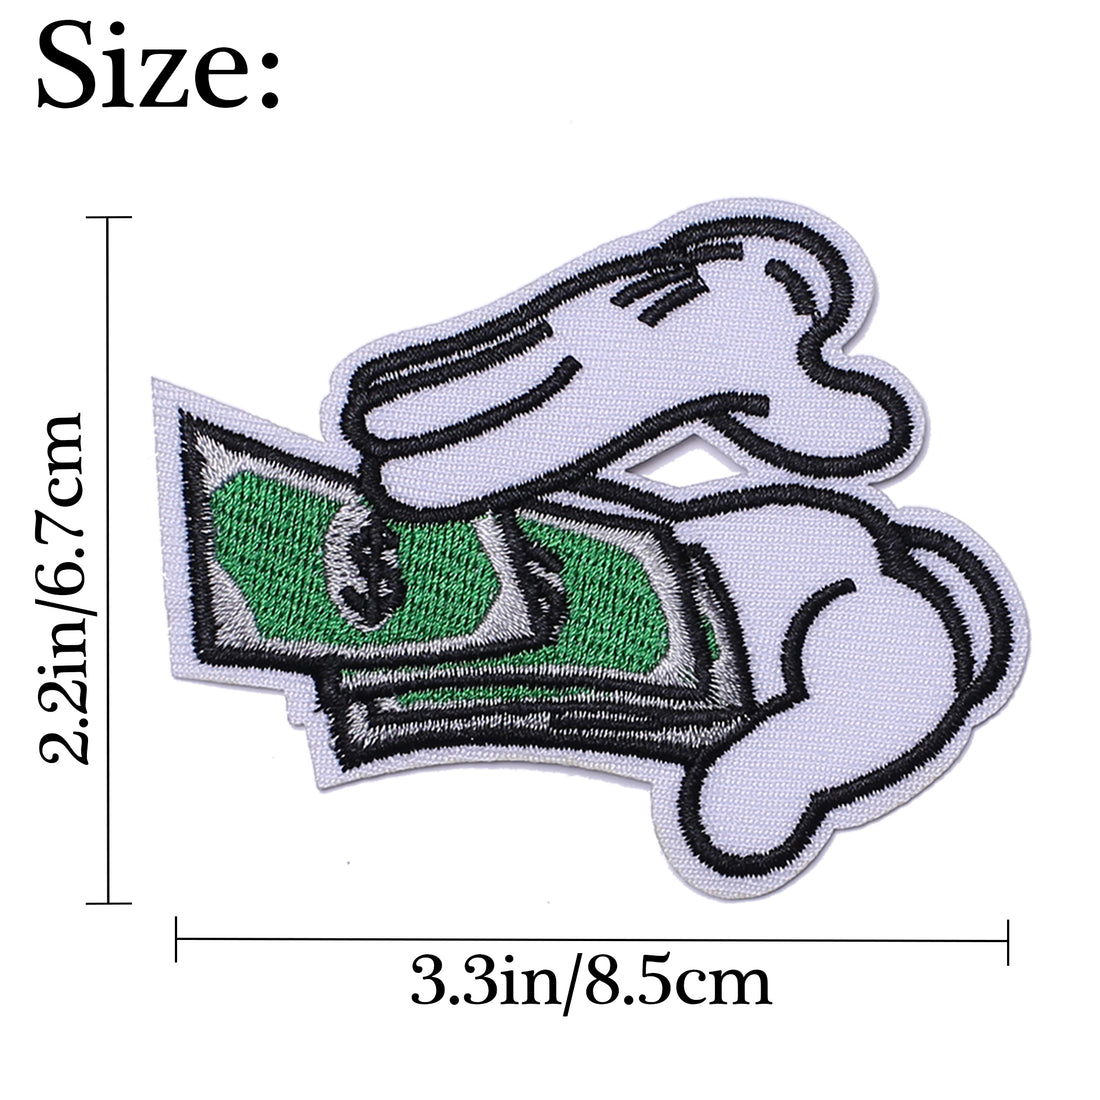 5Pcs Counting Money Embroidered Iron on Patch for Clothes, Iron-on Patches / Sew-on Appliques Patches for Clothing, Jackets, Backpacks, Caps, Jeans